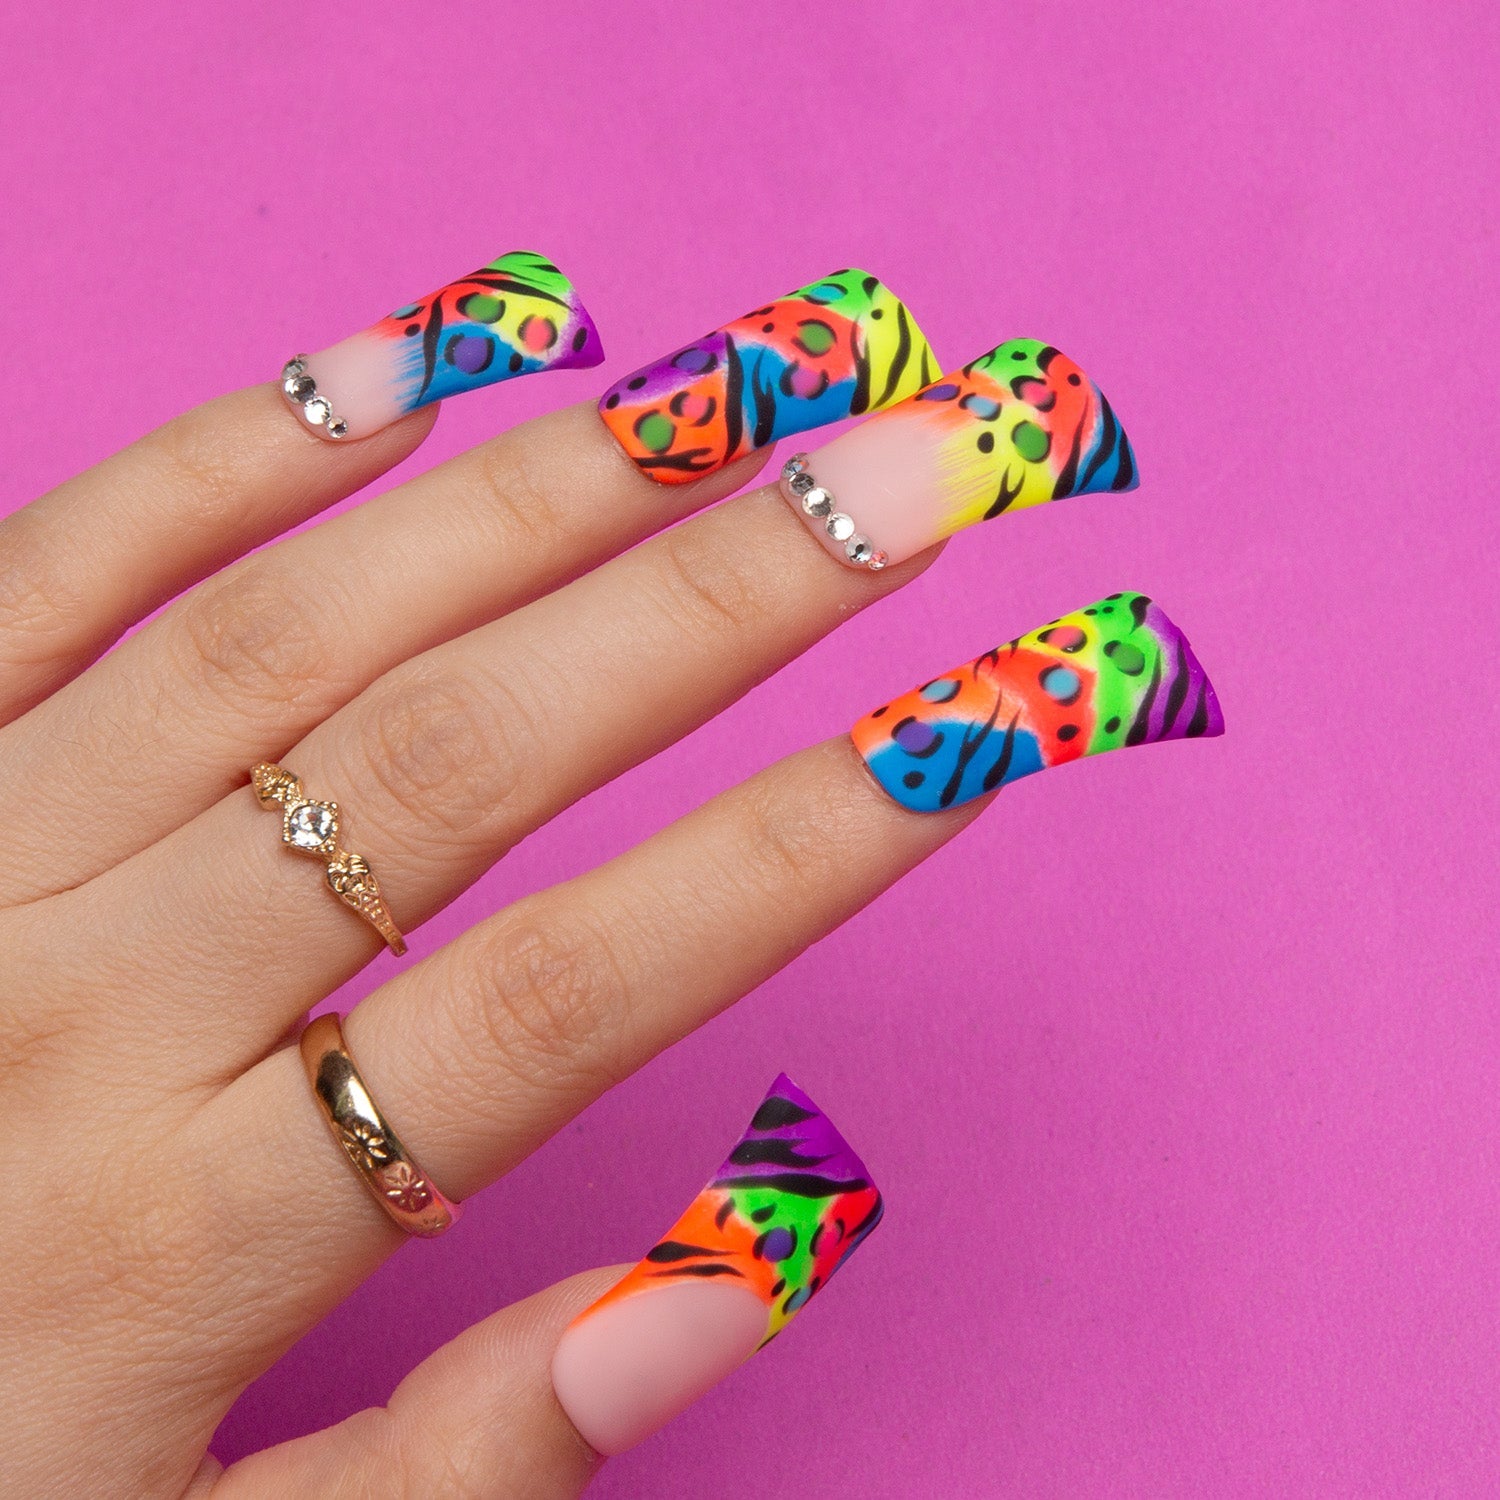 Colorful French tip press-on nails with bright leopard prints on hand wearing gold rings, showcasing 'duck' shaped nails against a pink background. Perfect for a playful, confident look.